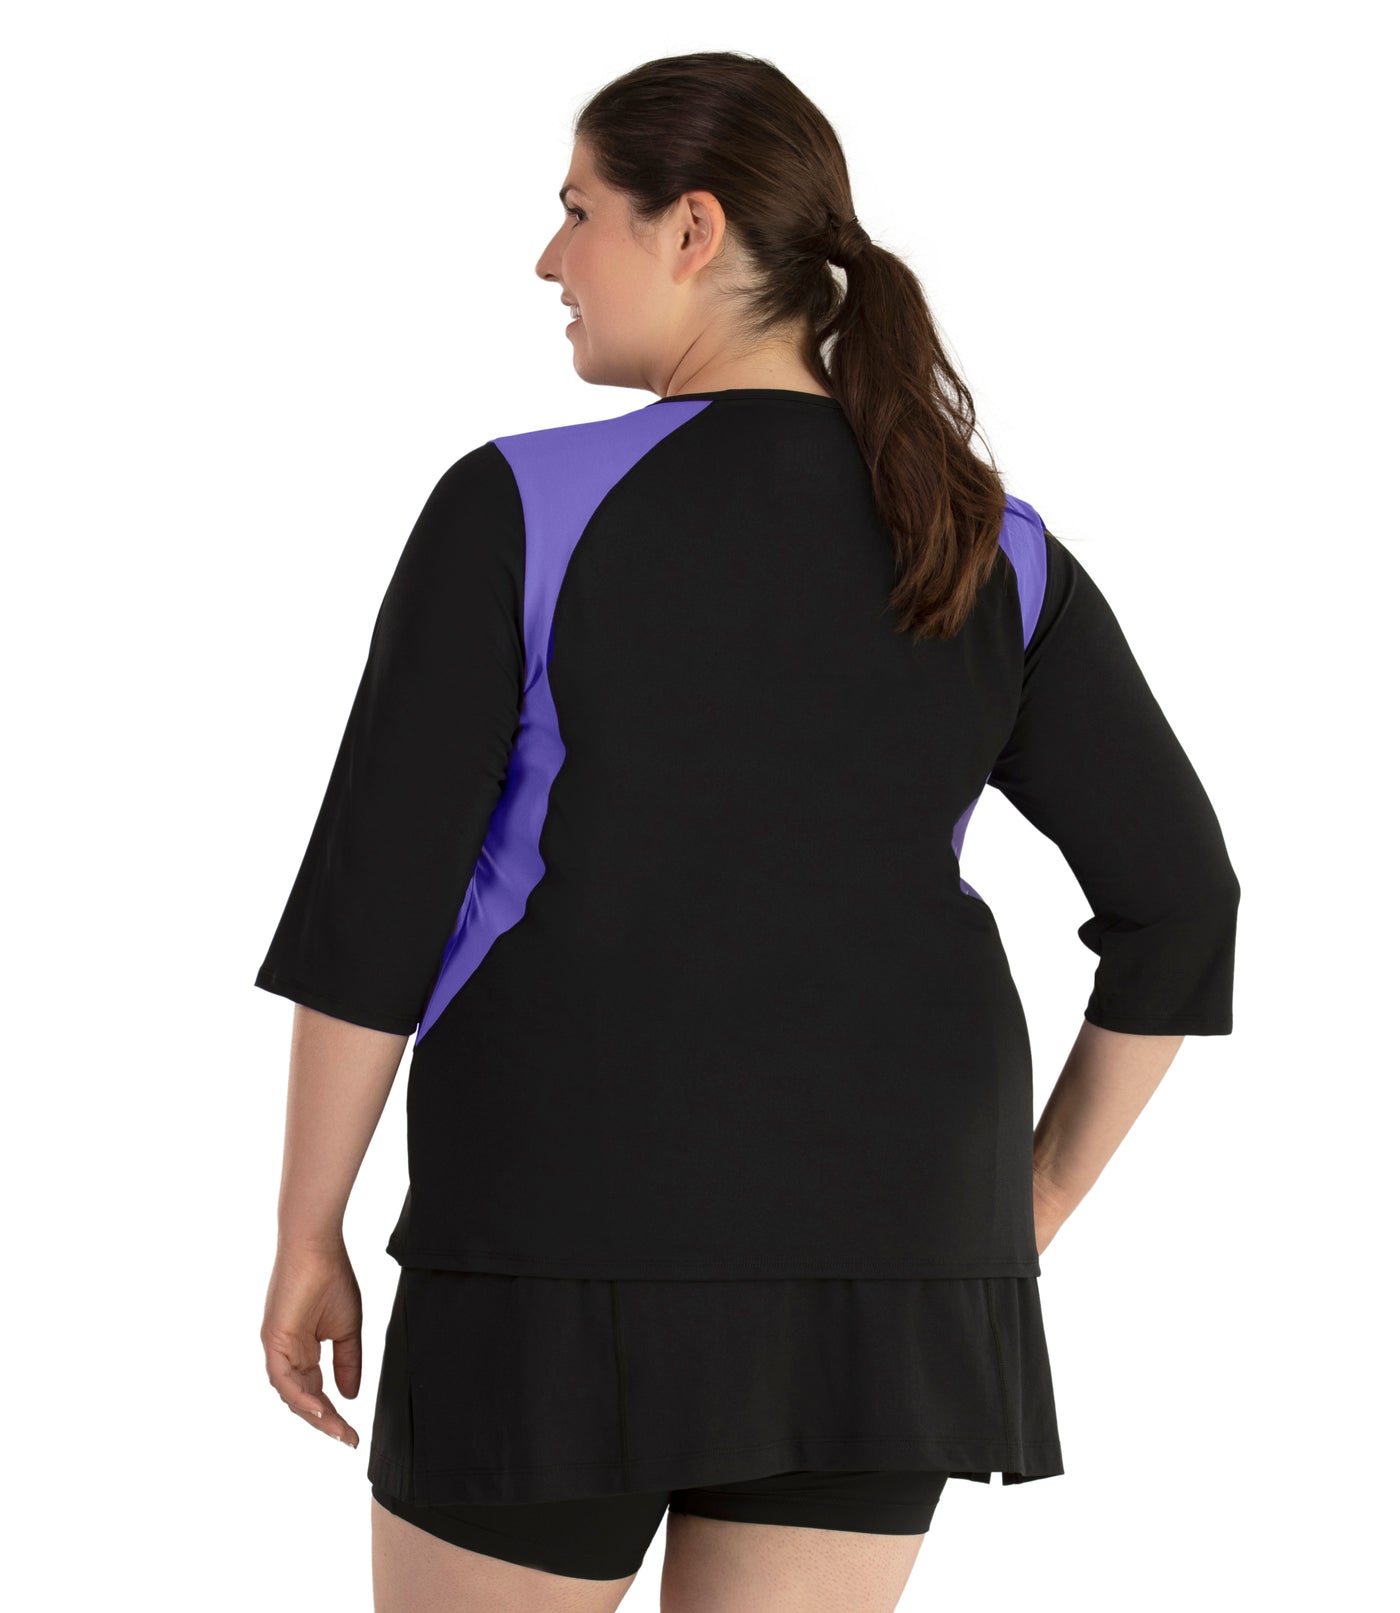 Plus size woman, facing back and side profile, wearing AquaSport Three Quarter Sleeve Rash Guard Purple and Black. V-neckline, black torso and sleeves with purple colorblock at shoulder and waist. She is wearing a pair of black JunoActive plus size swim shorts.